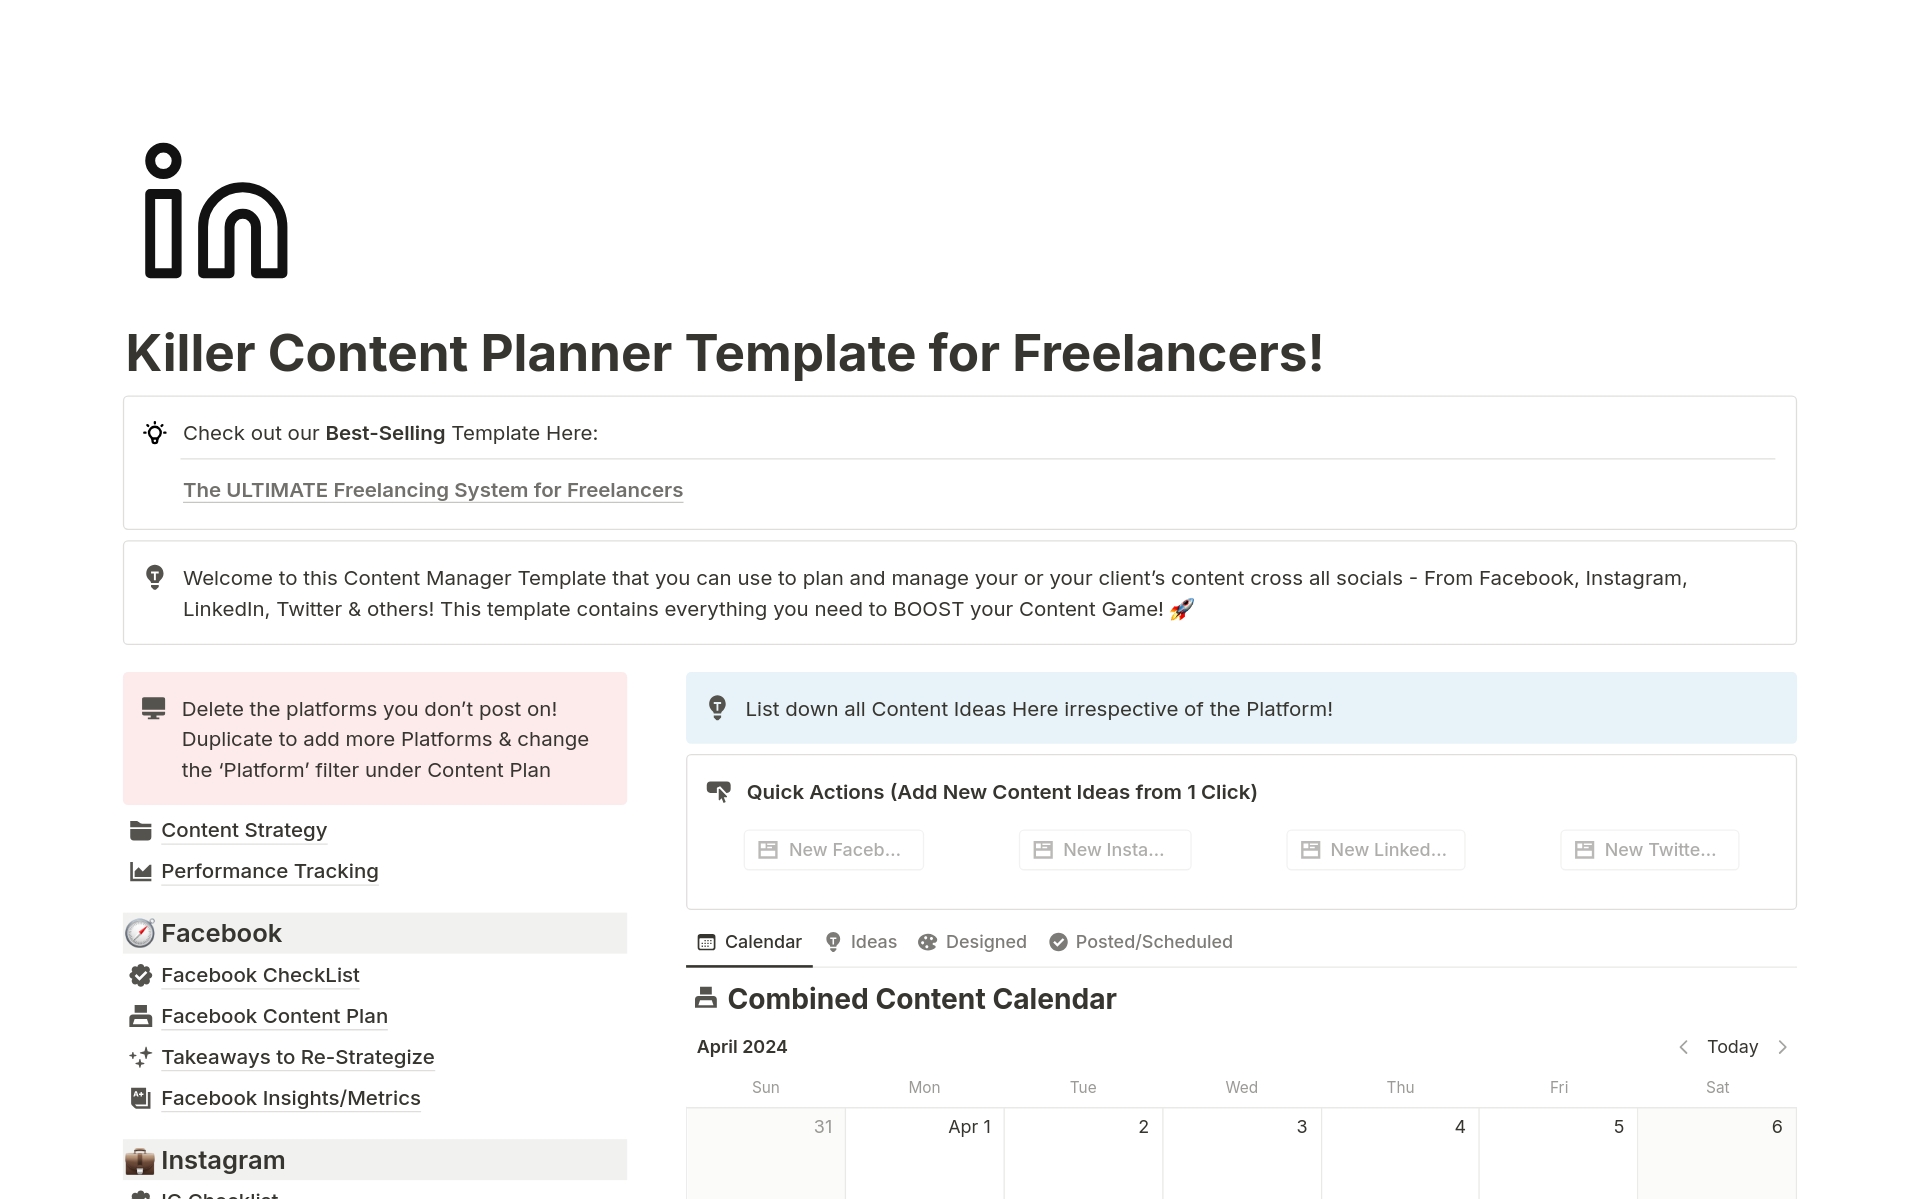 A template preview for Killer Content Planner for Freelancers & Creators!